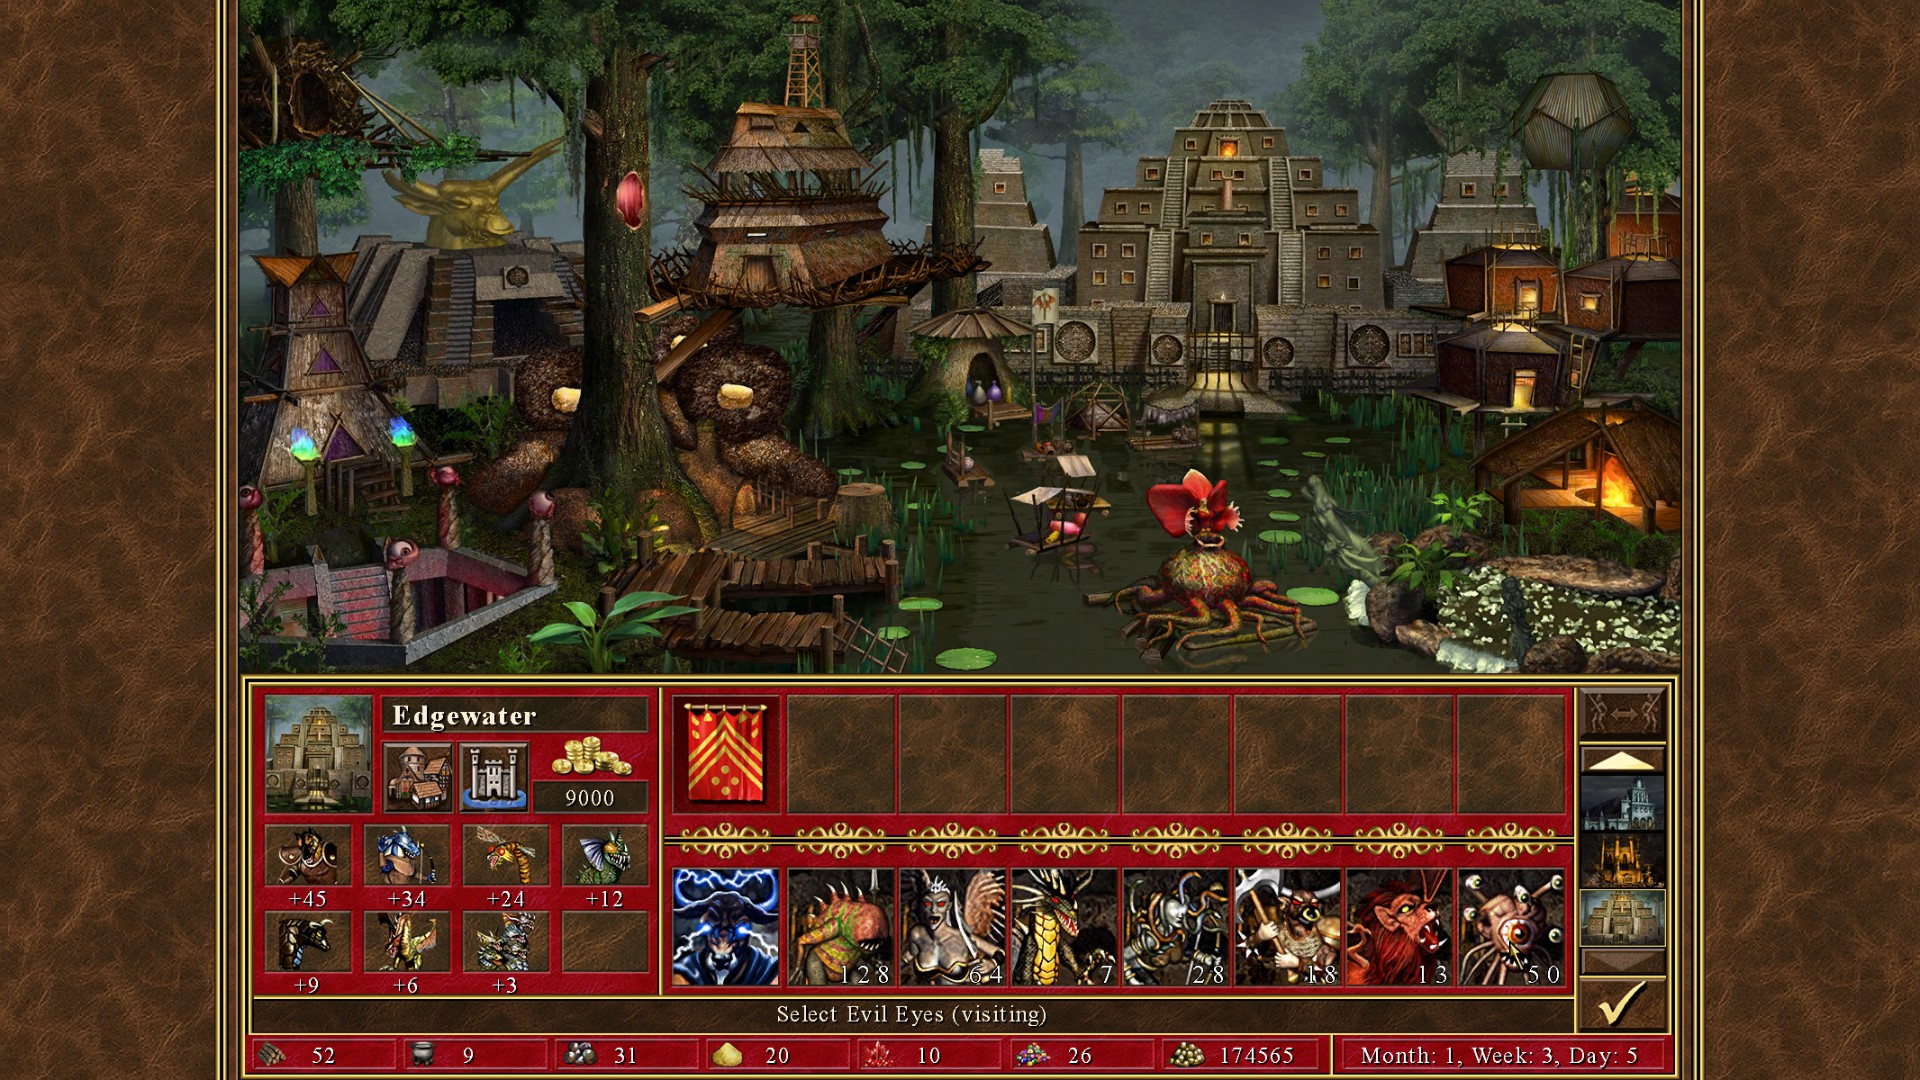 Heroes Of Might Magic Iii Hd Edition On Steam